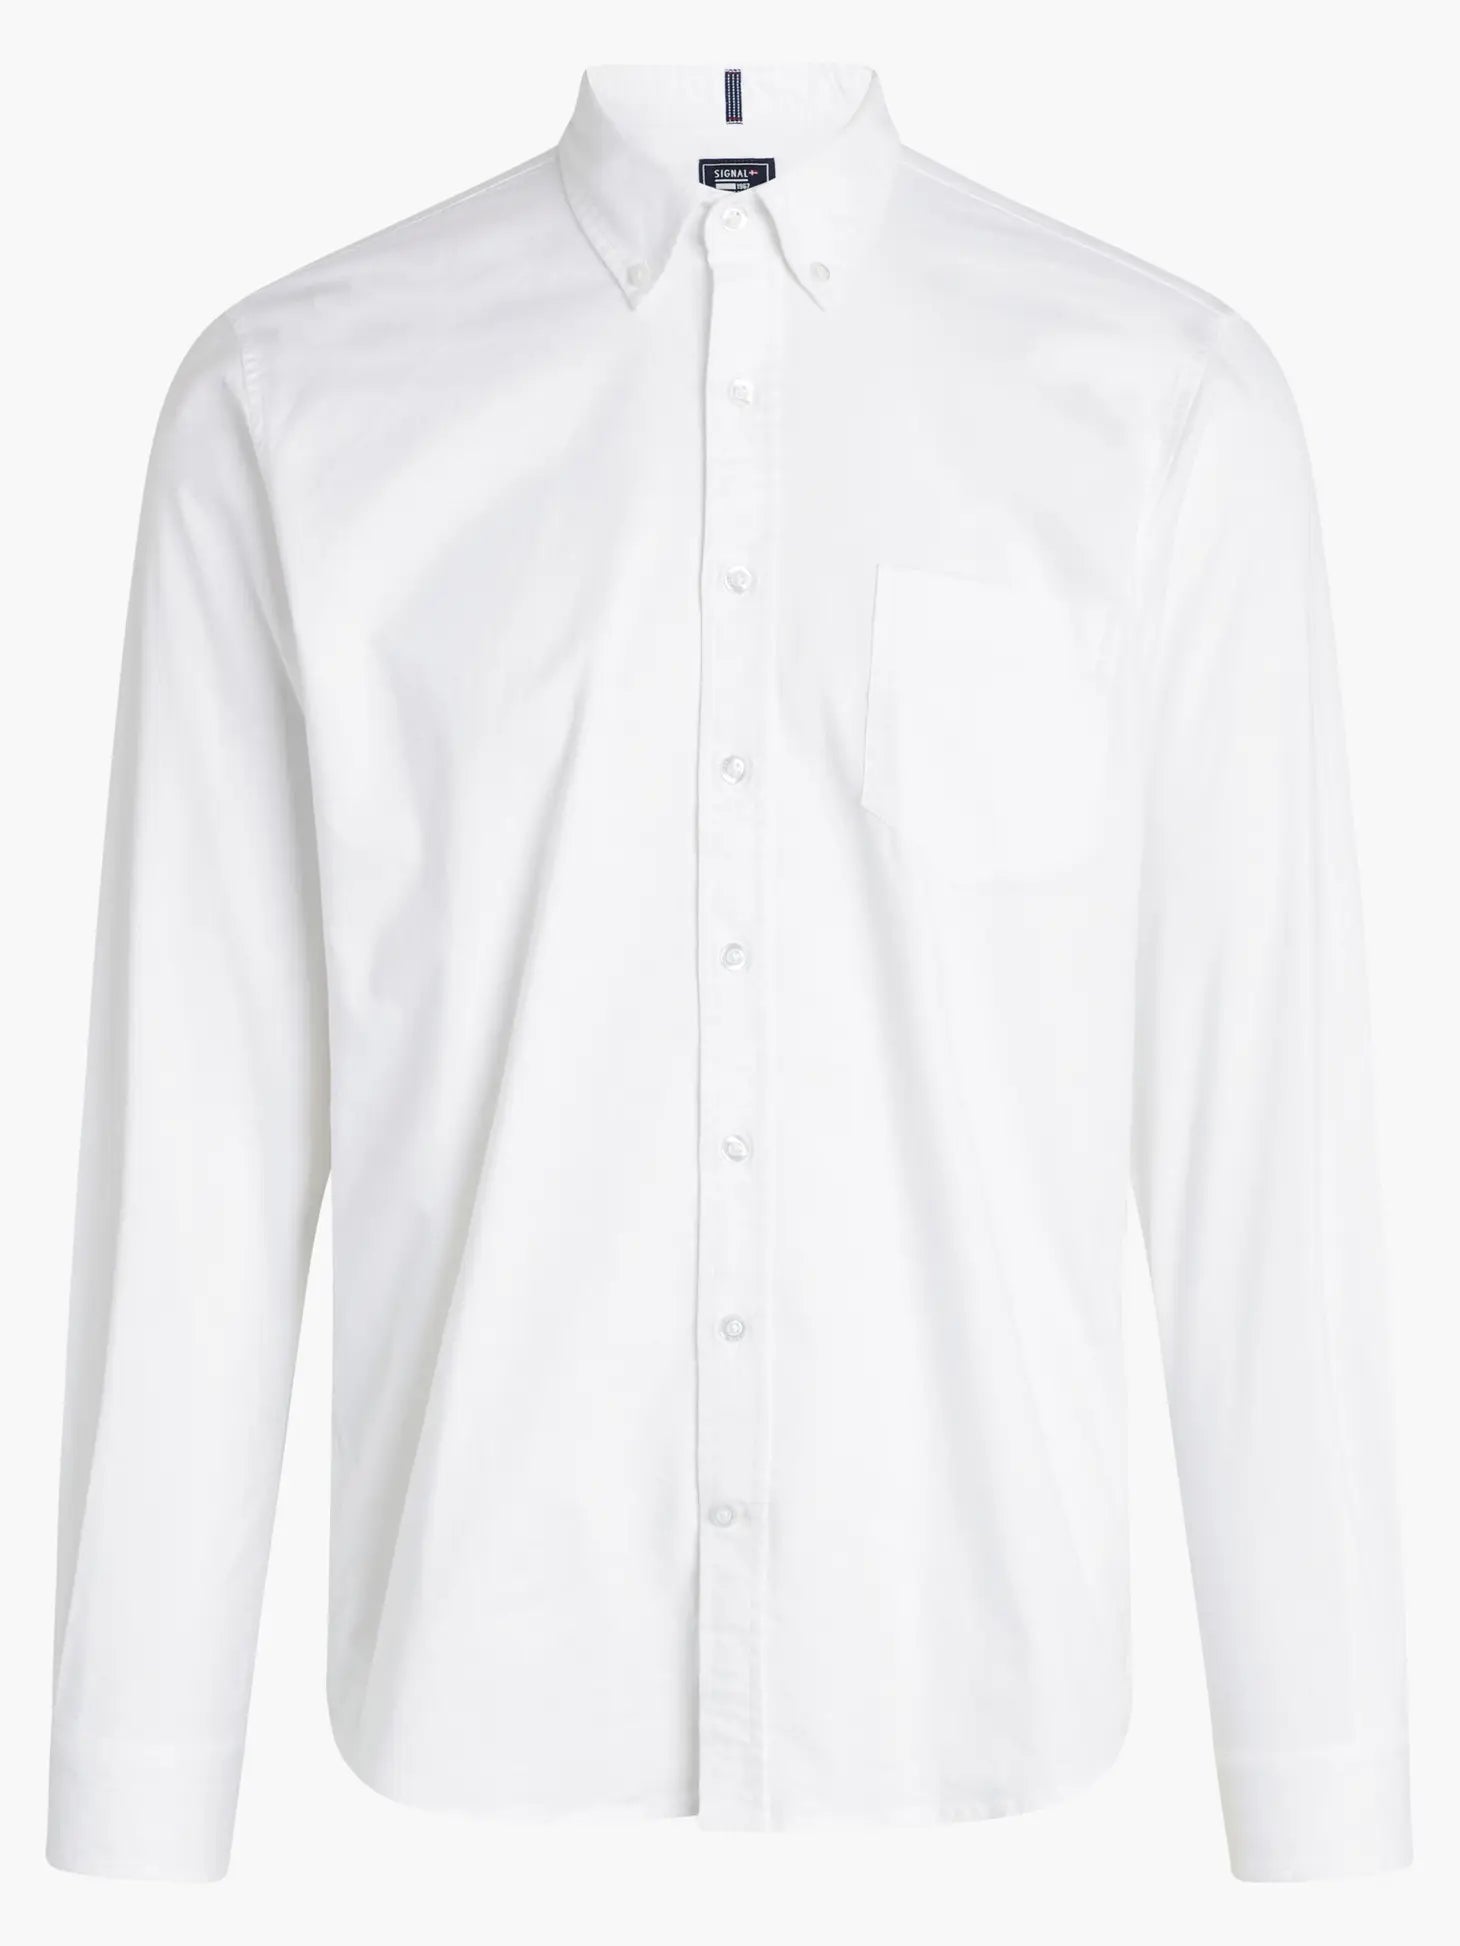 tofu Discreet hamer Signal Clothing White Solid Long Sleeve Oxford Button Up – Taelor.Style